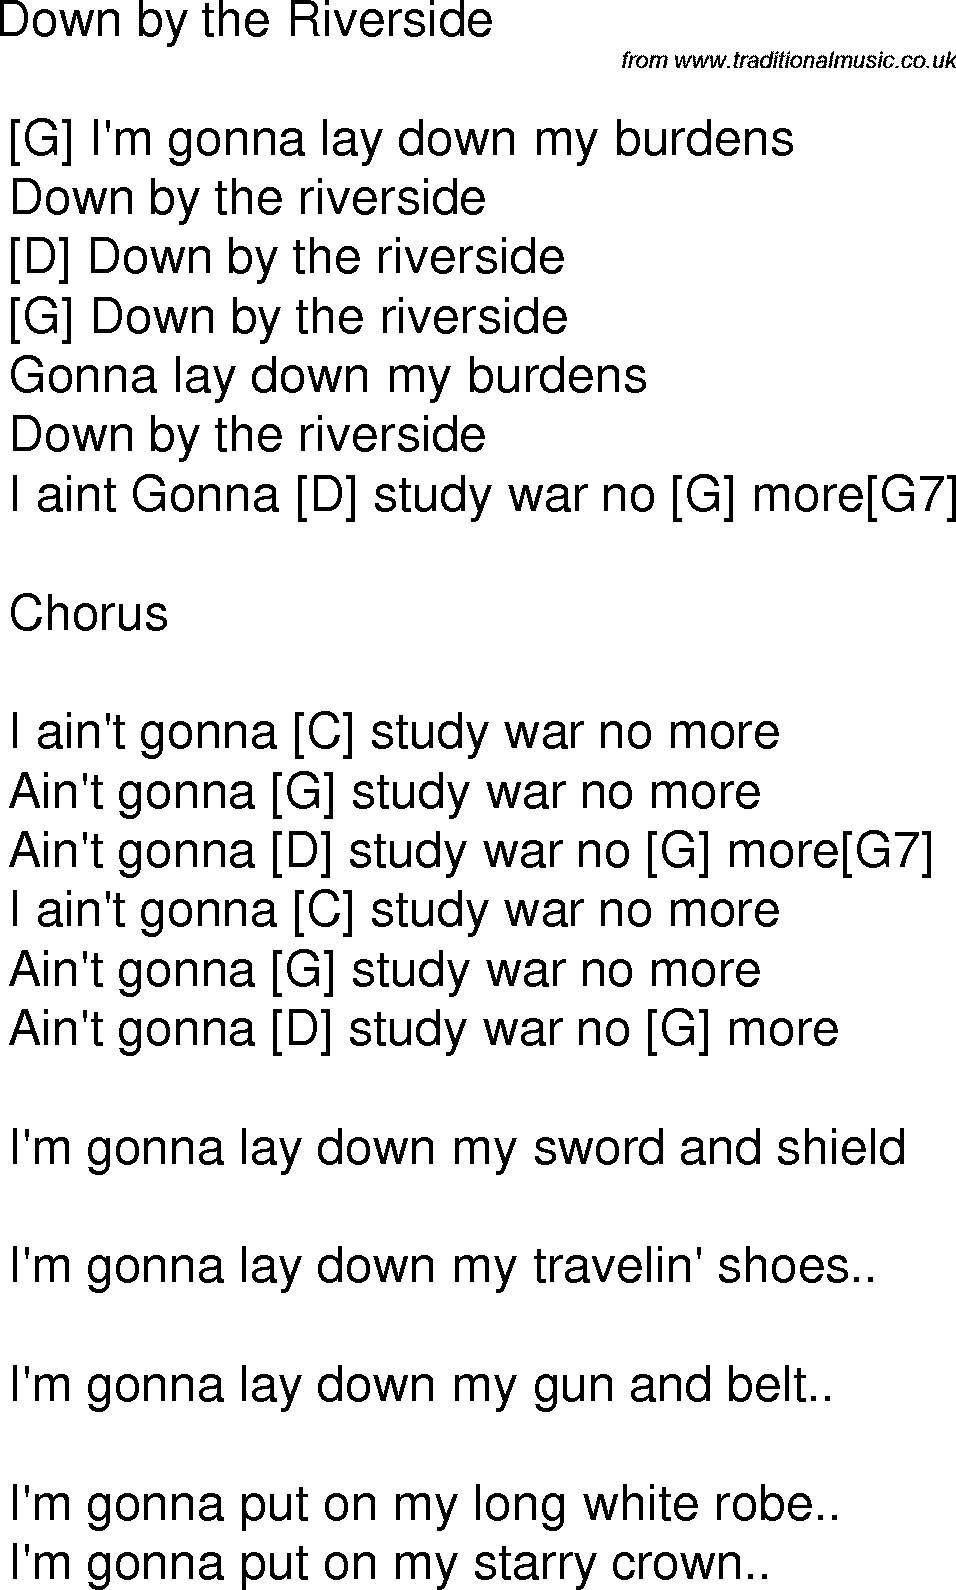 Old time song lyrics with chords for Down By The Riverside C